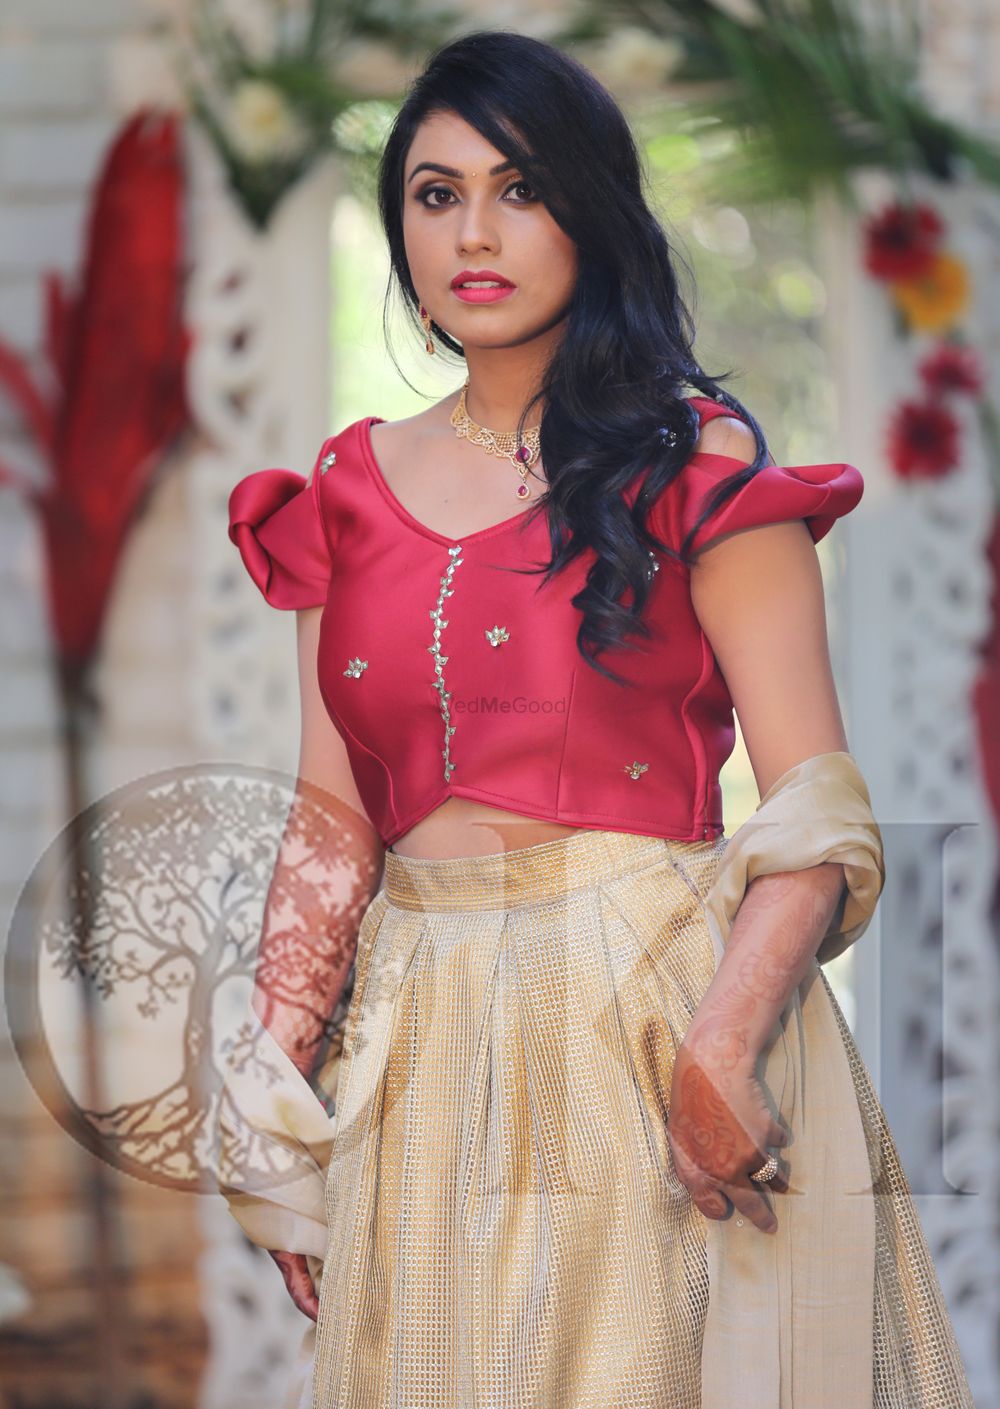 Photo From Fairytale hand-embroidered Red and Gold Princess lehengas - By OKI